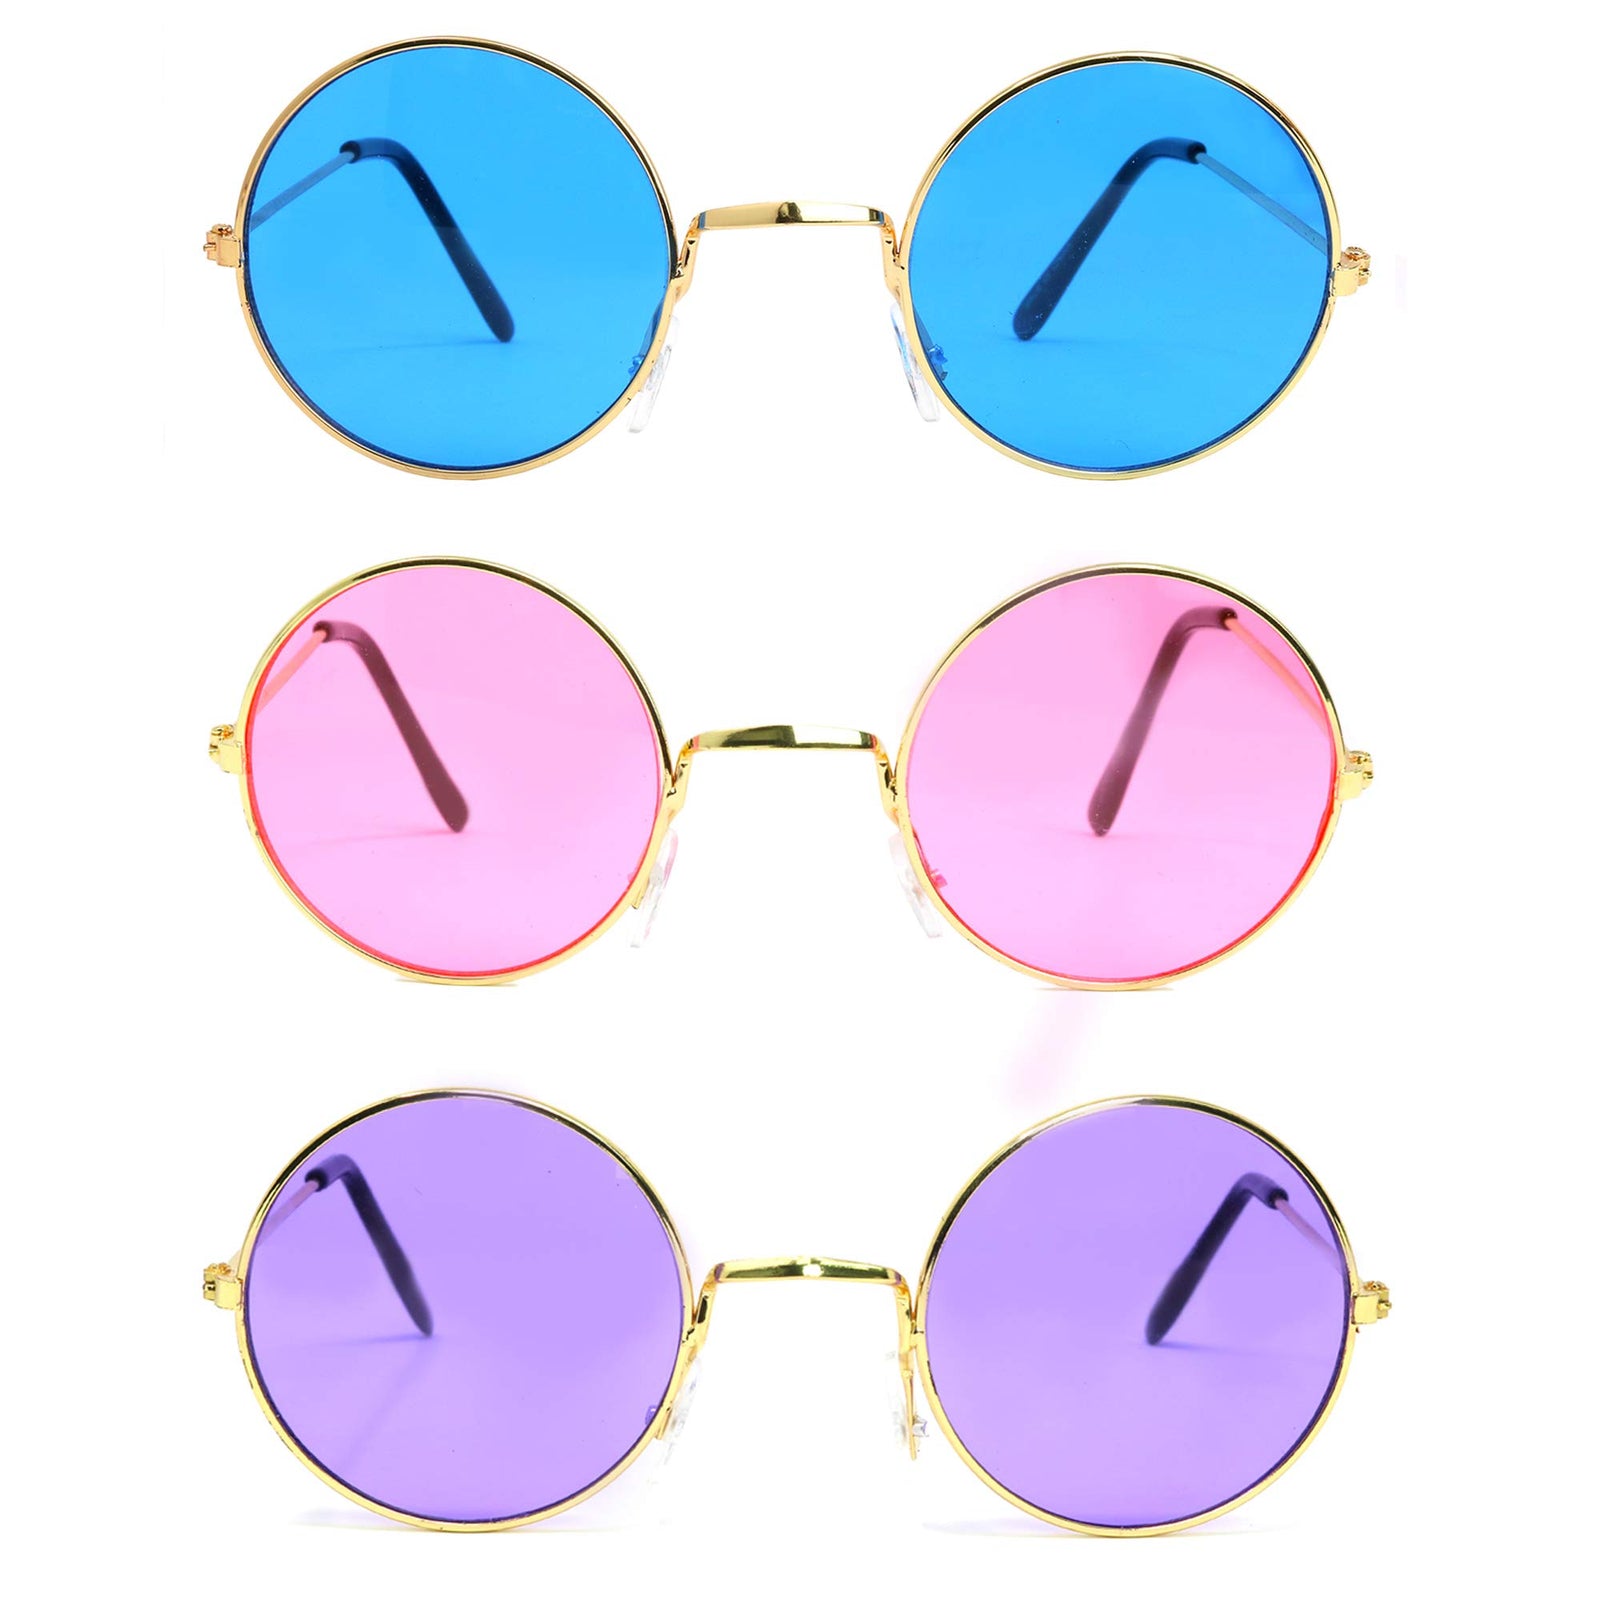 Skeleteen Tinted Round Hippie Glasses – Pink Purple And Blue 60's Style Hipster Circle Sunglasses - 3 Pairs